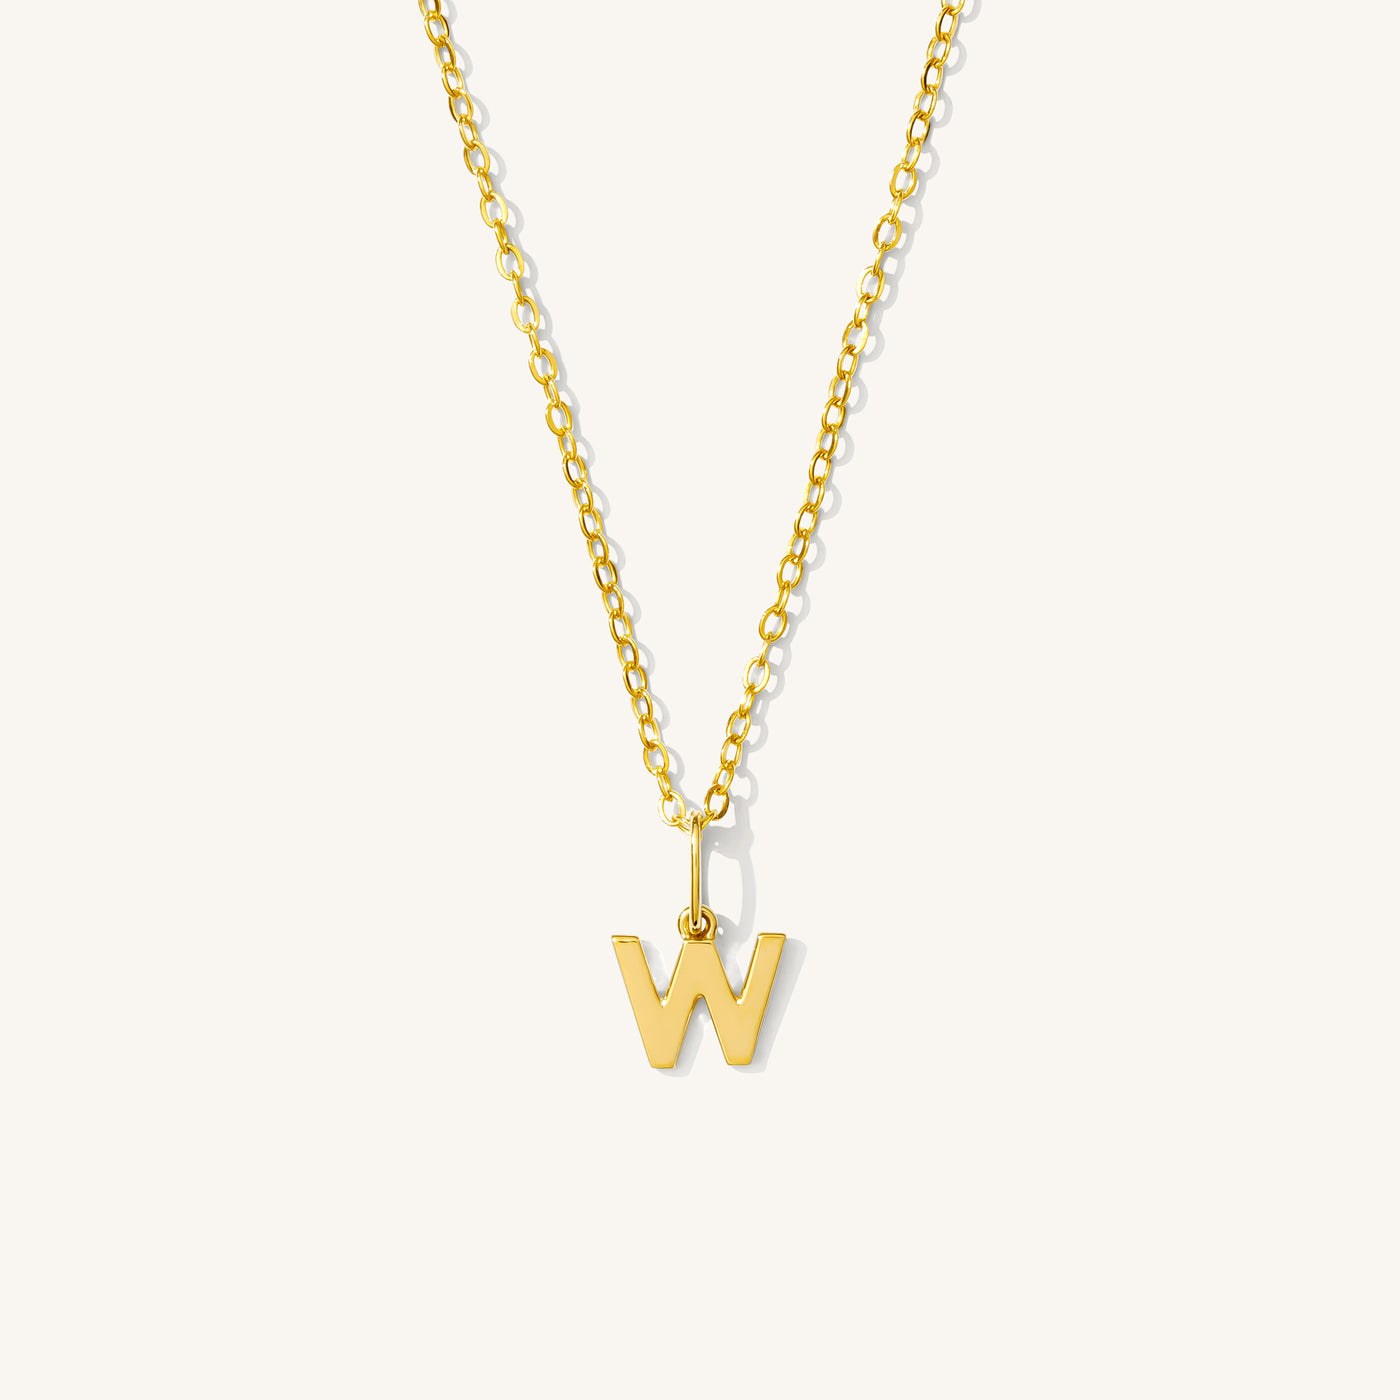 W Tiny Hanging Initial Necklace